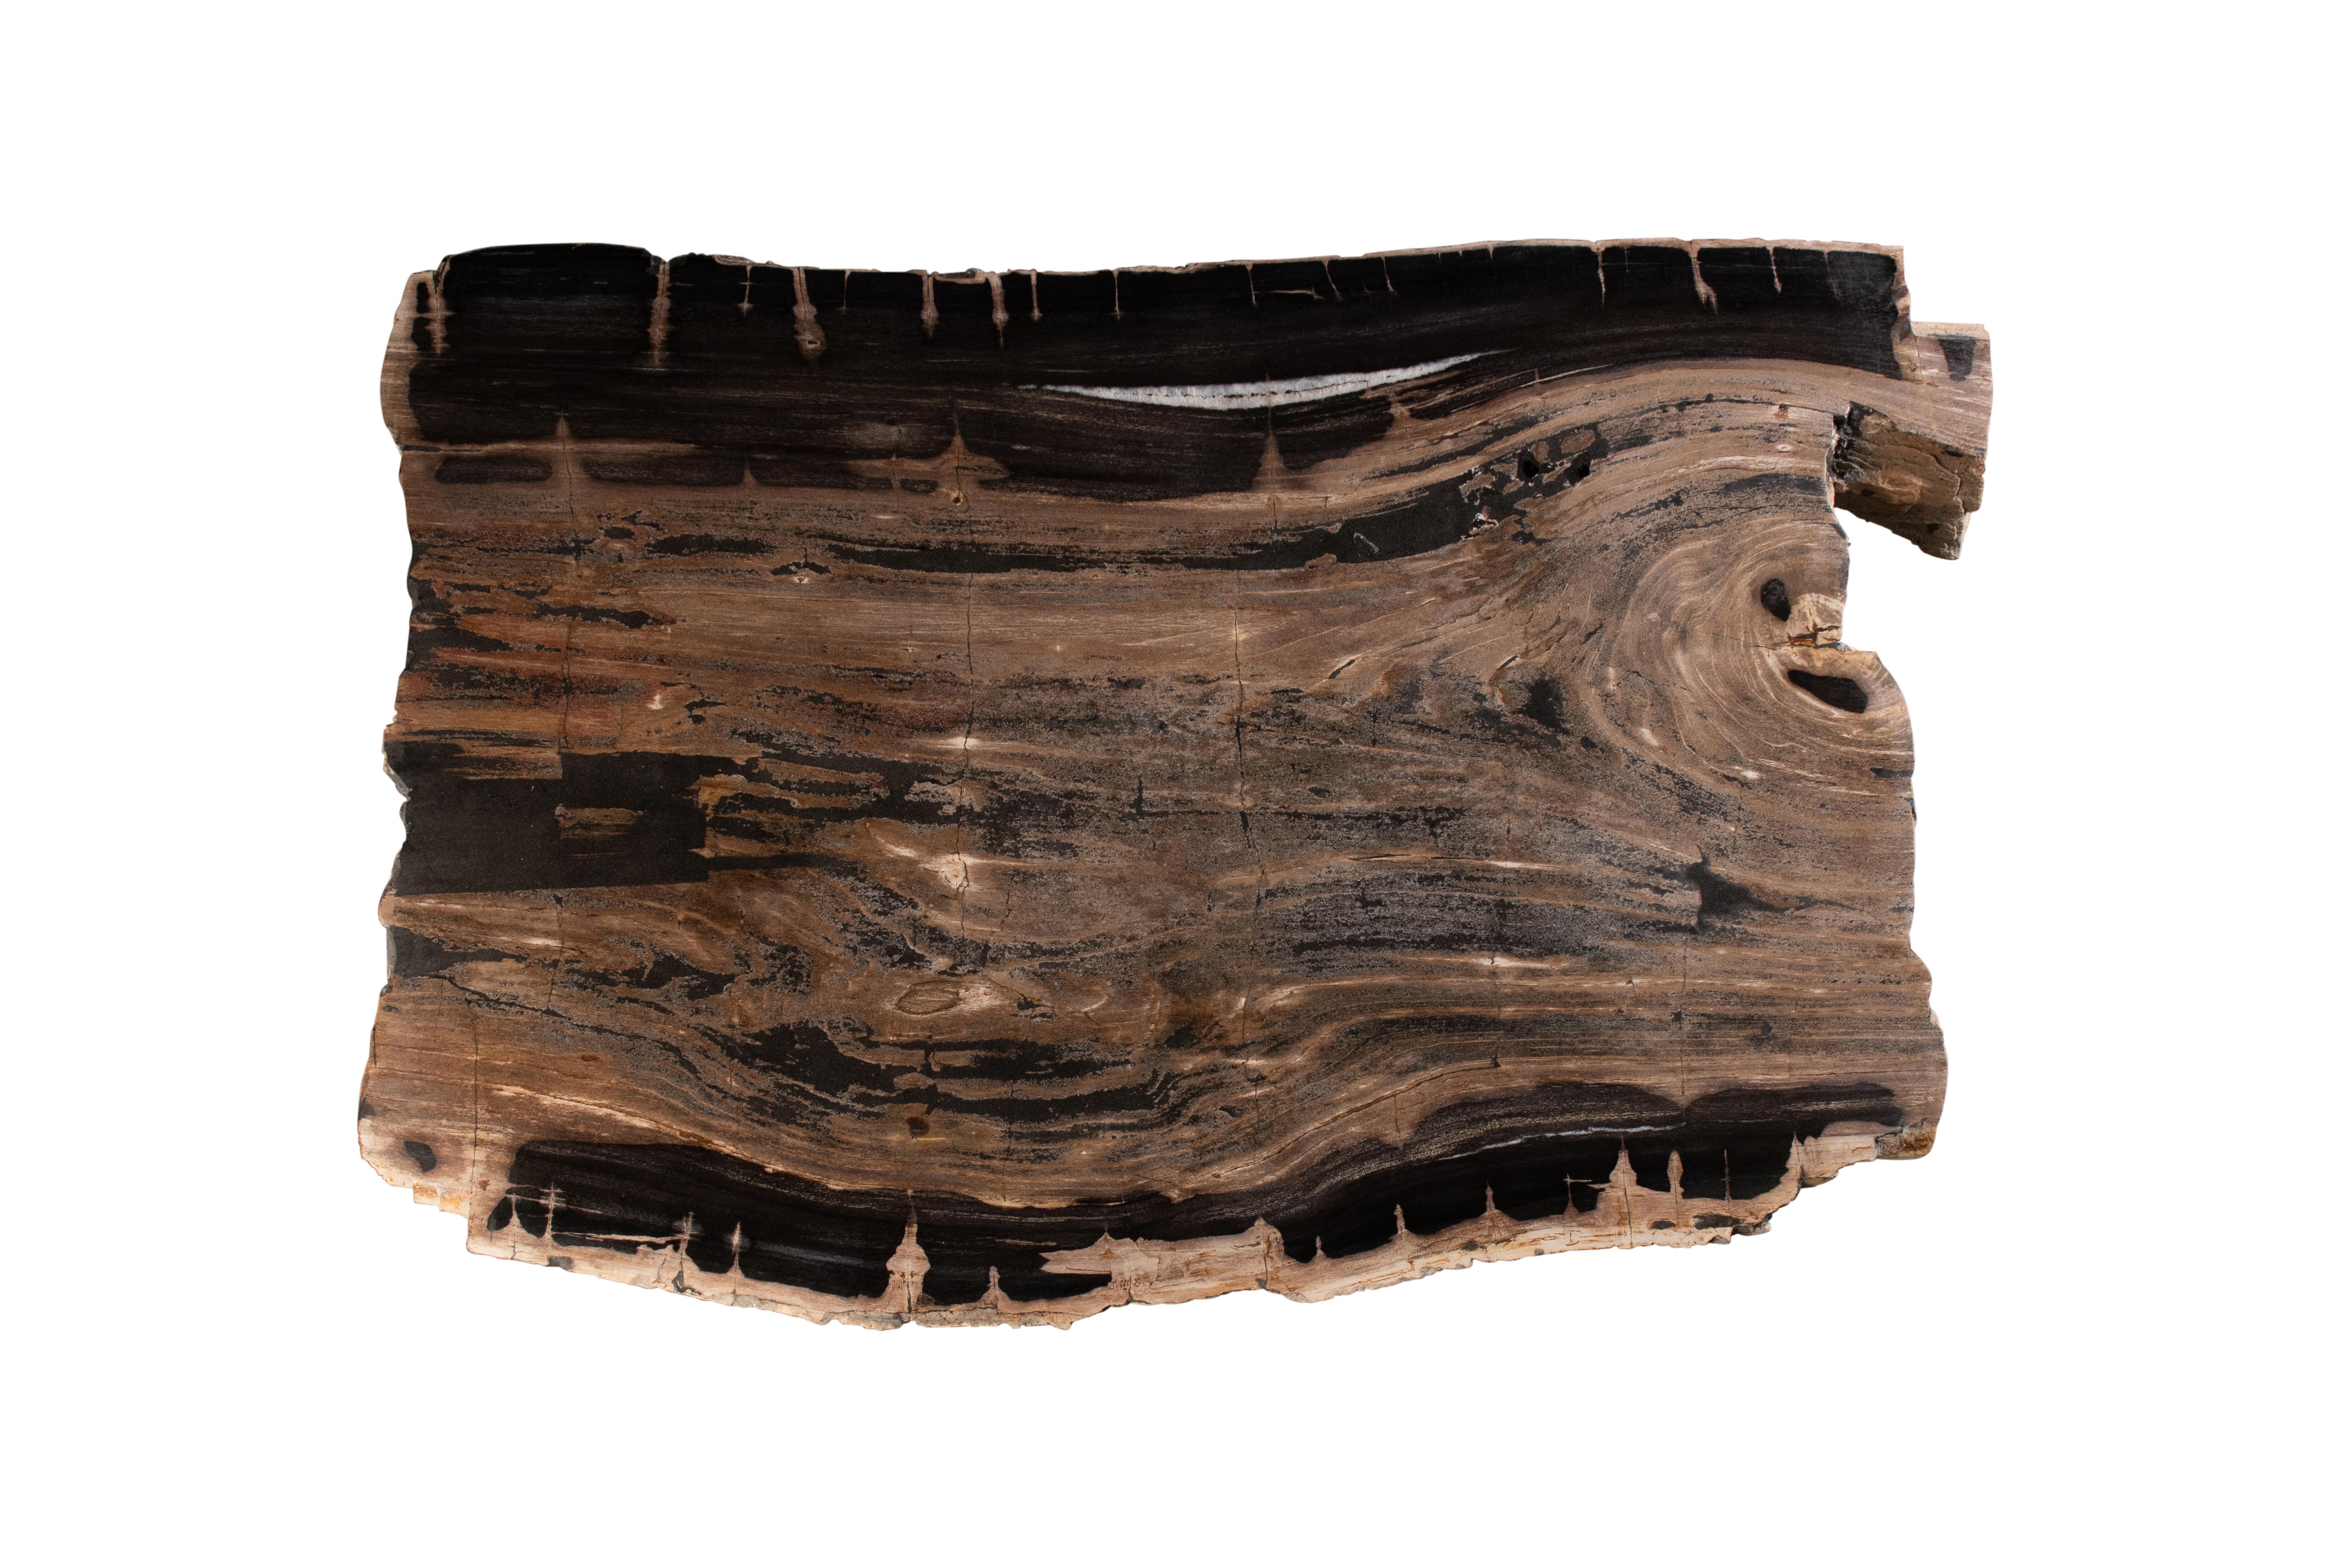 The petrified wood tabletop is sculpted from fossilised wood, each one as unique as the tree that it was originally carved from. Nature designs and dictates scale, encapsulating the organic nature of each piece. Cracks and shade variations as well